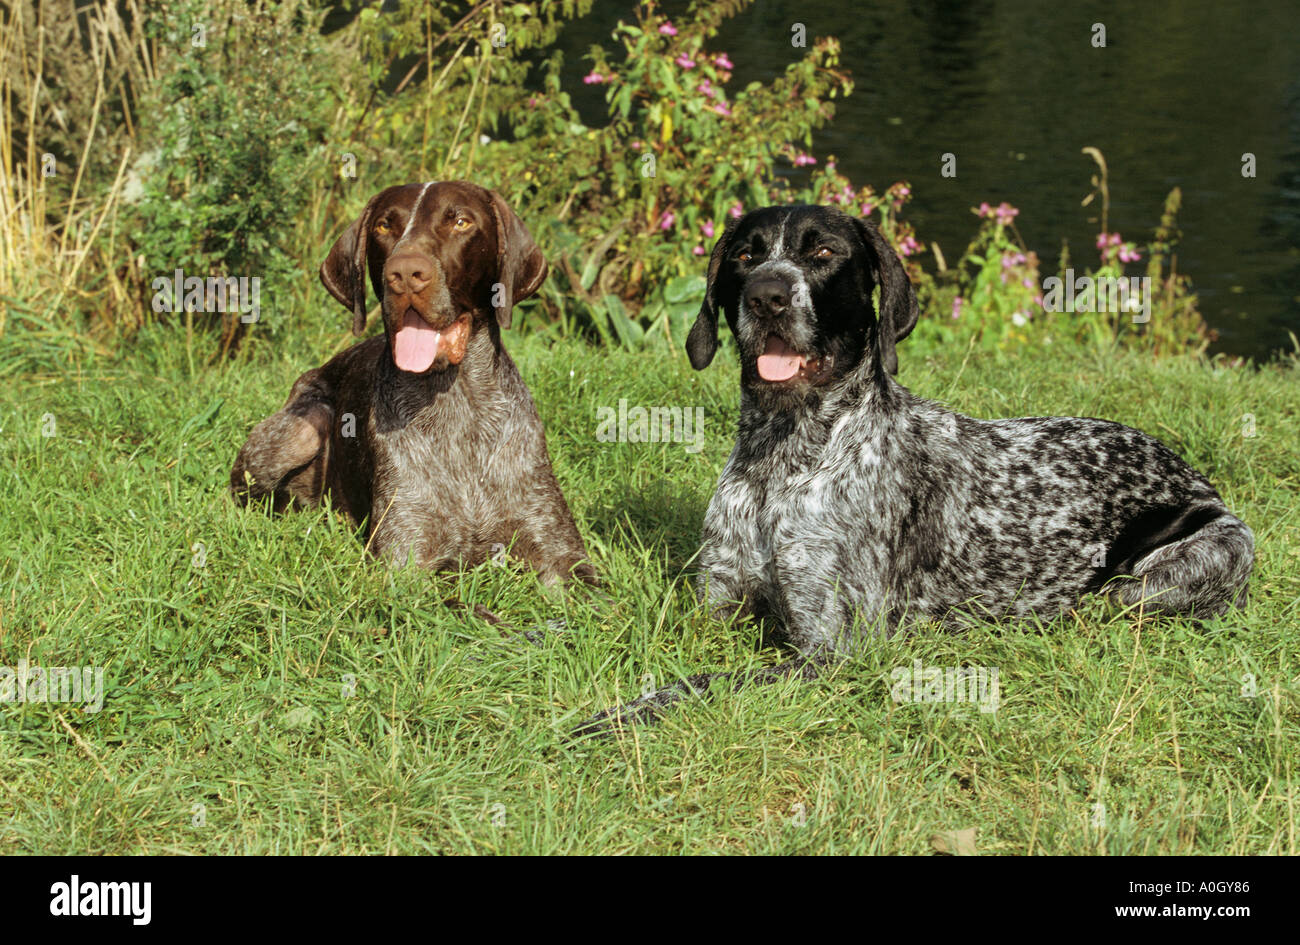 German Shorthaired dog and German Wirehair dog Stock Photo